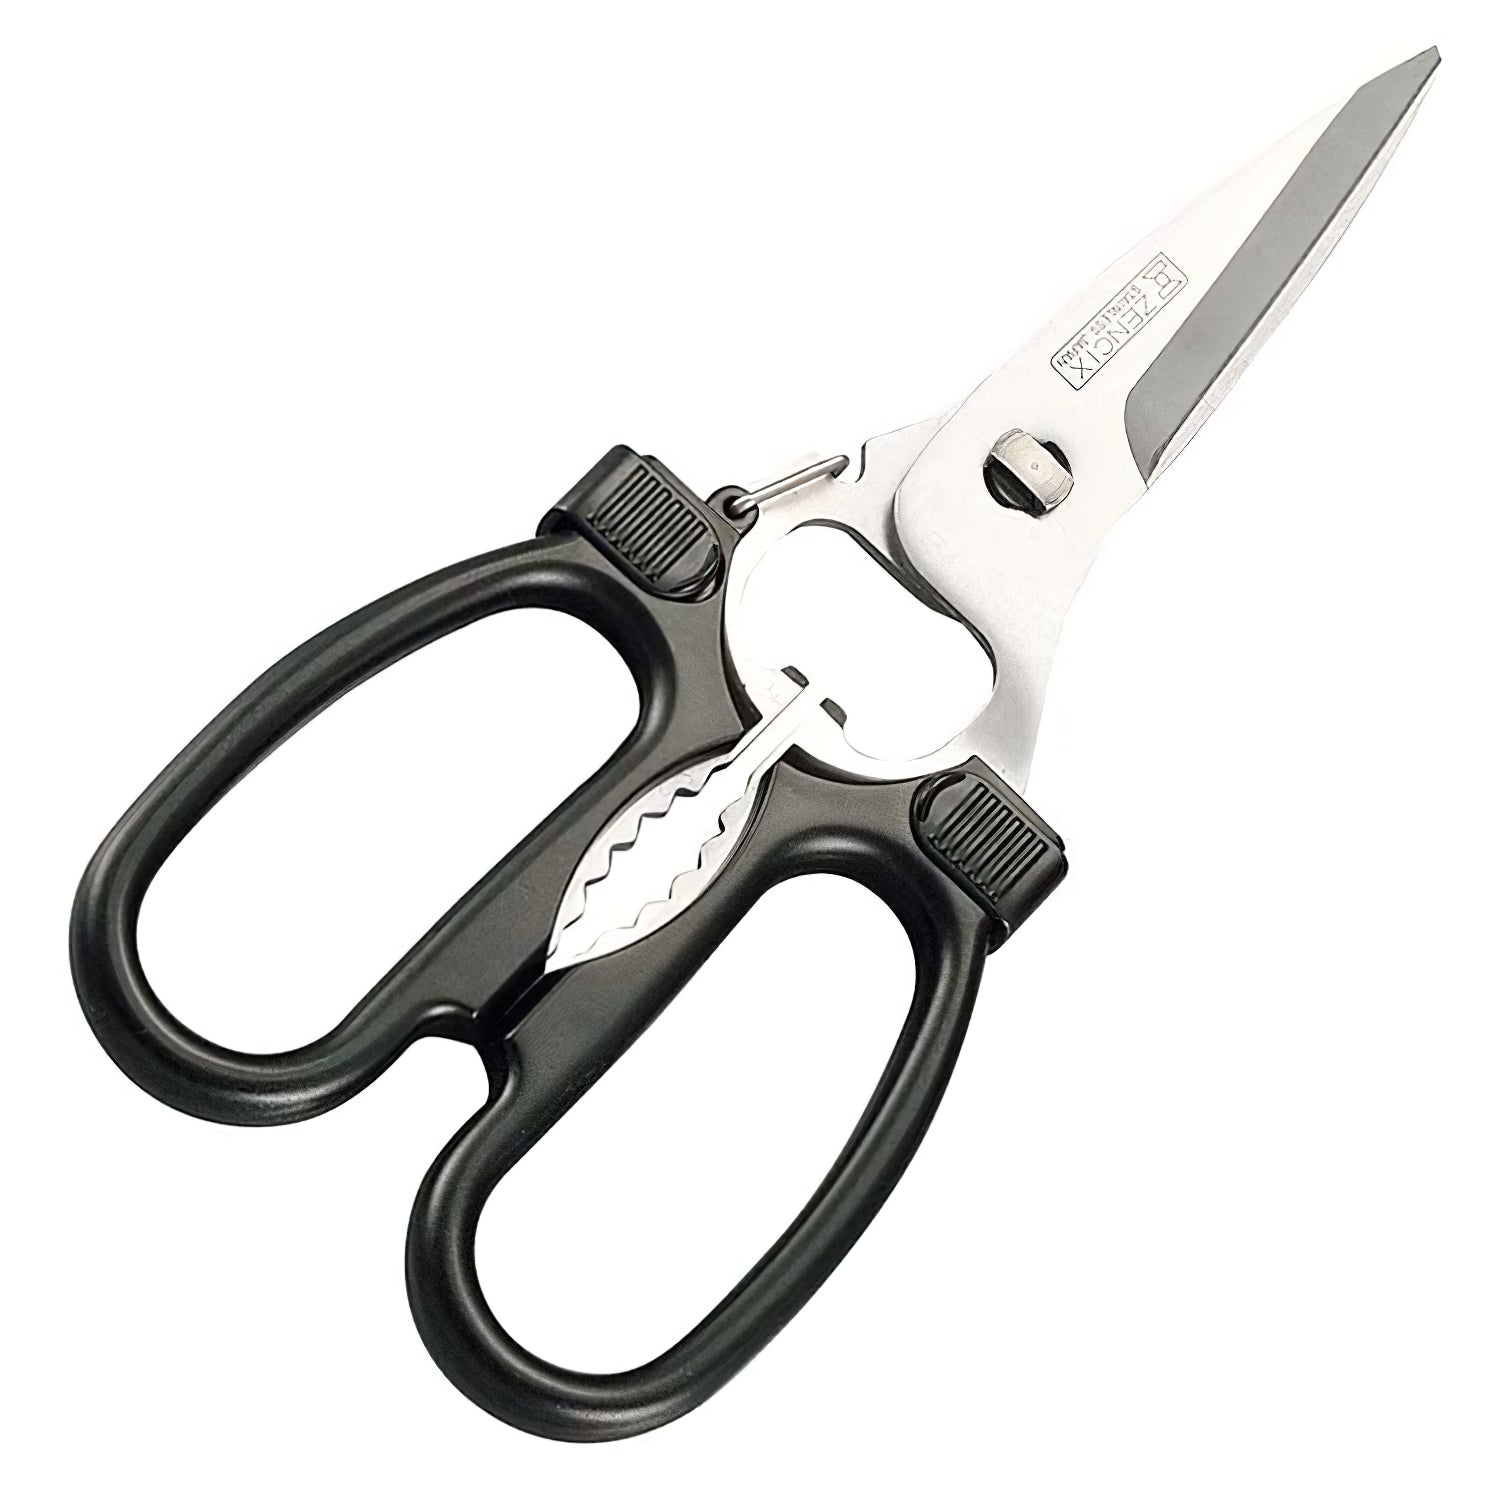 CANARY Japanese Craft Scissors Heavy Duty Blade 7.8, Sharp Japanese  Stainless Steel Blade, Made in JAPAN